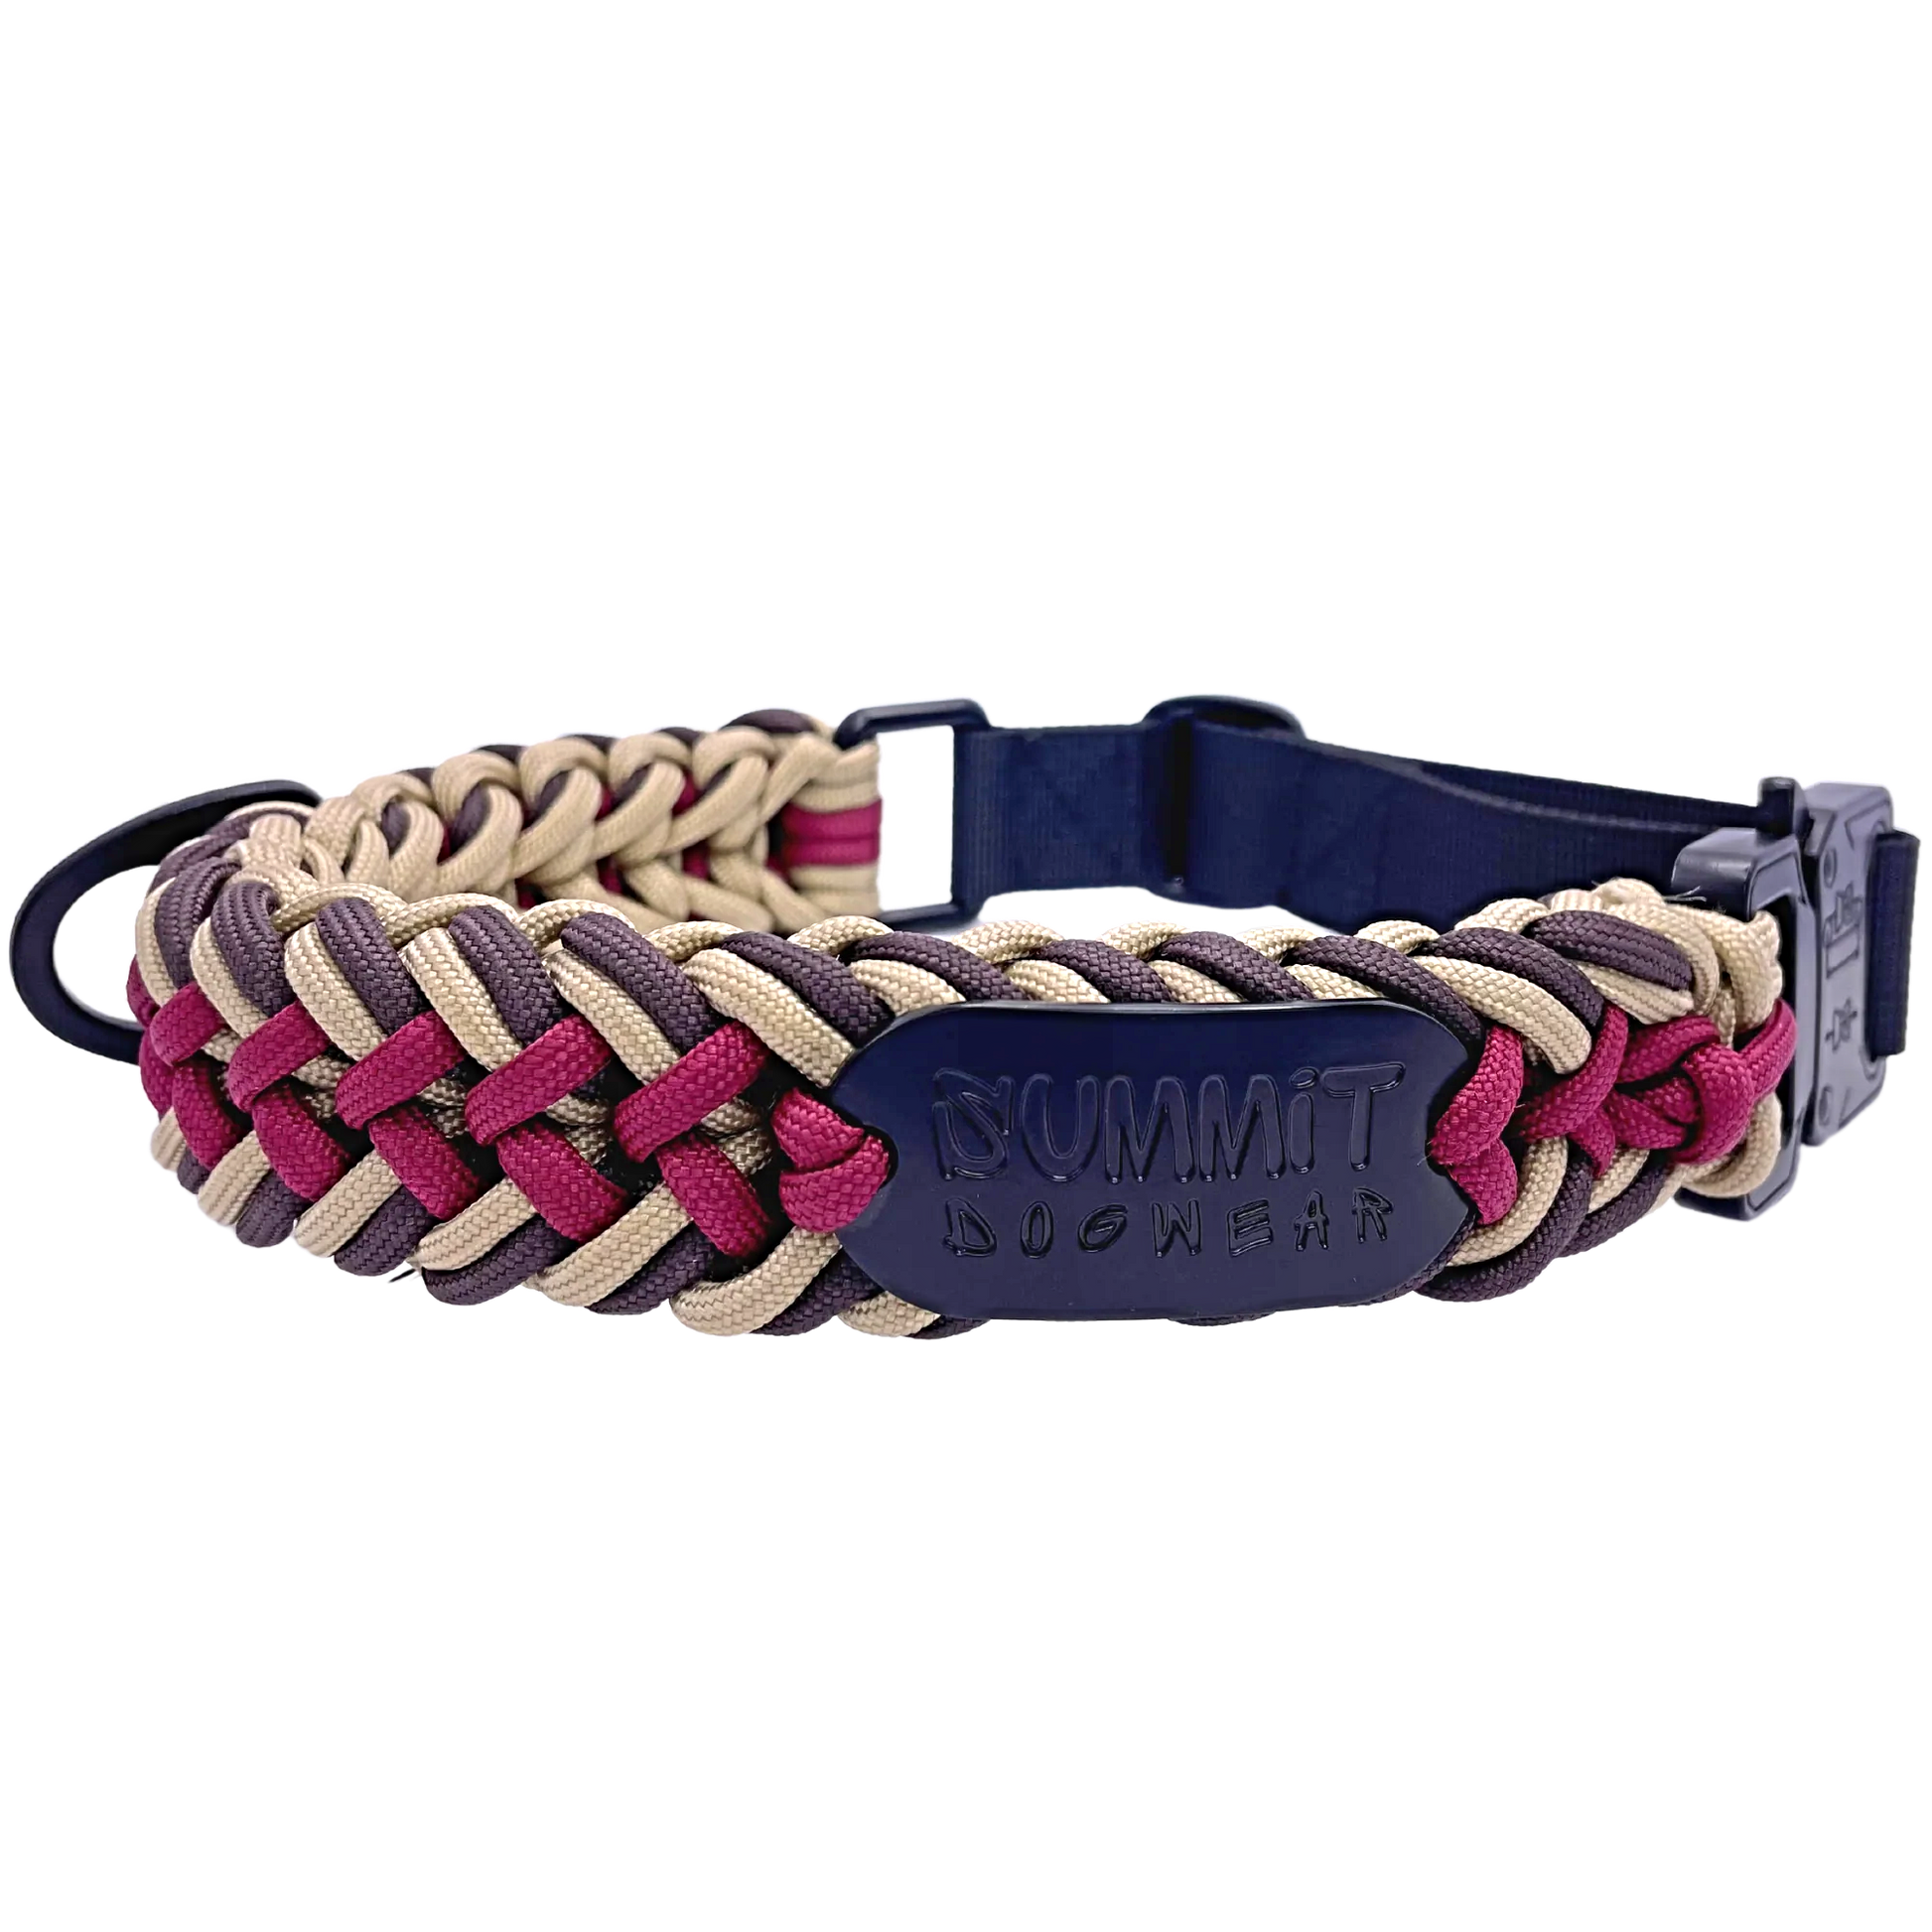 Premium quick-release tactical braided paracord dog collar in nomad colors